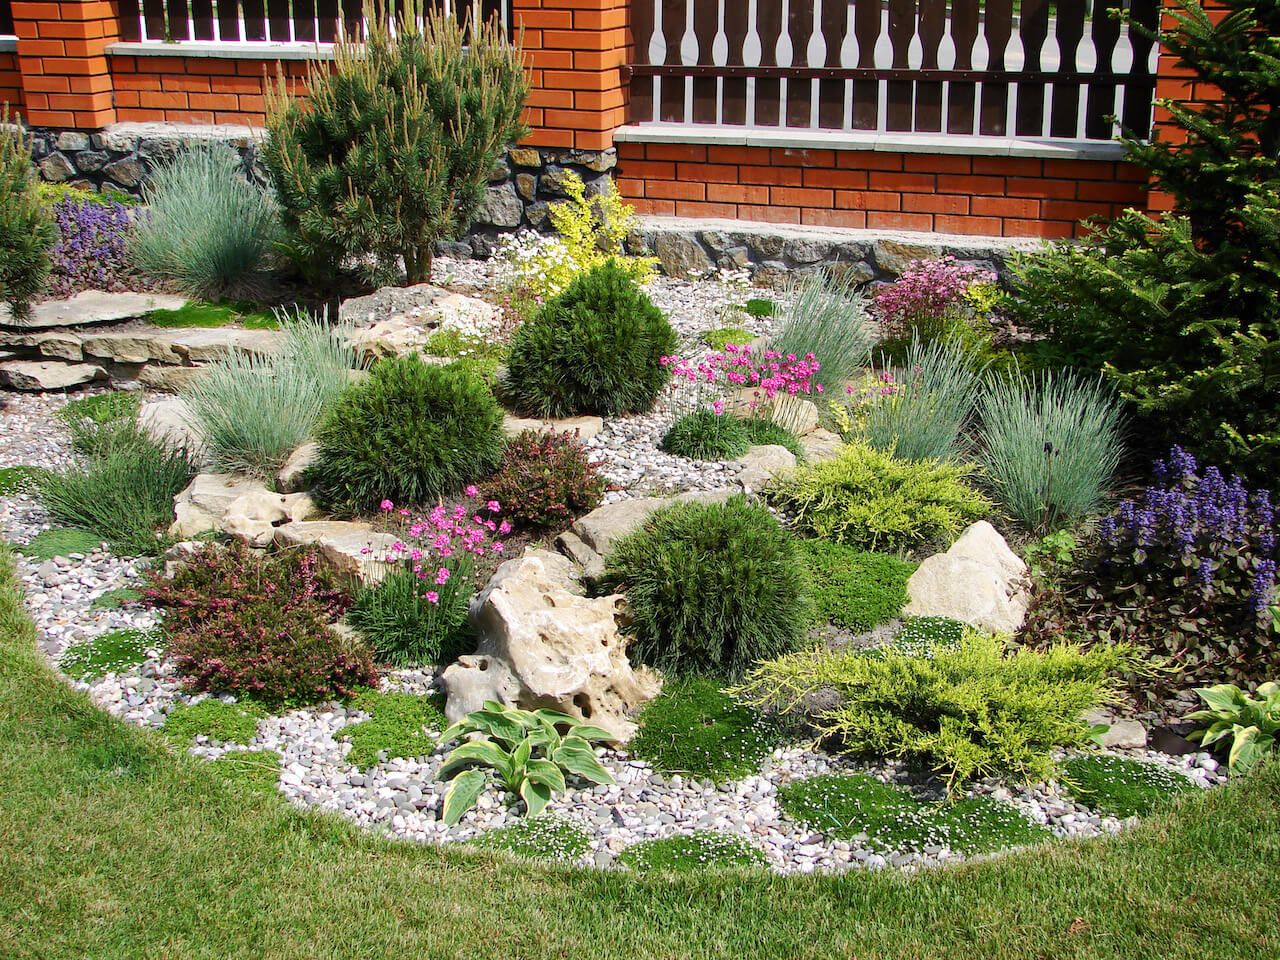 A serene rock garden featuring an array of smooth grey stones arranged in an elegant pattern with green shrubs and flowers.